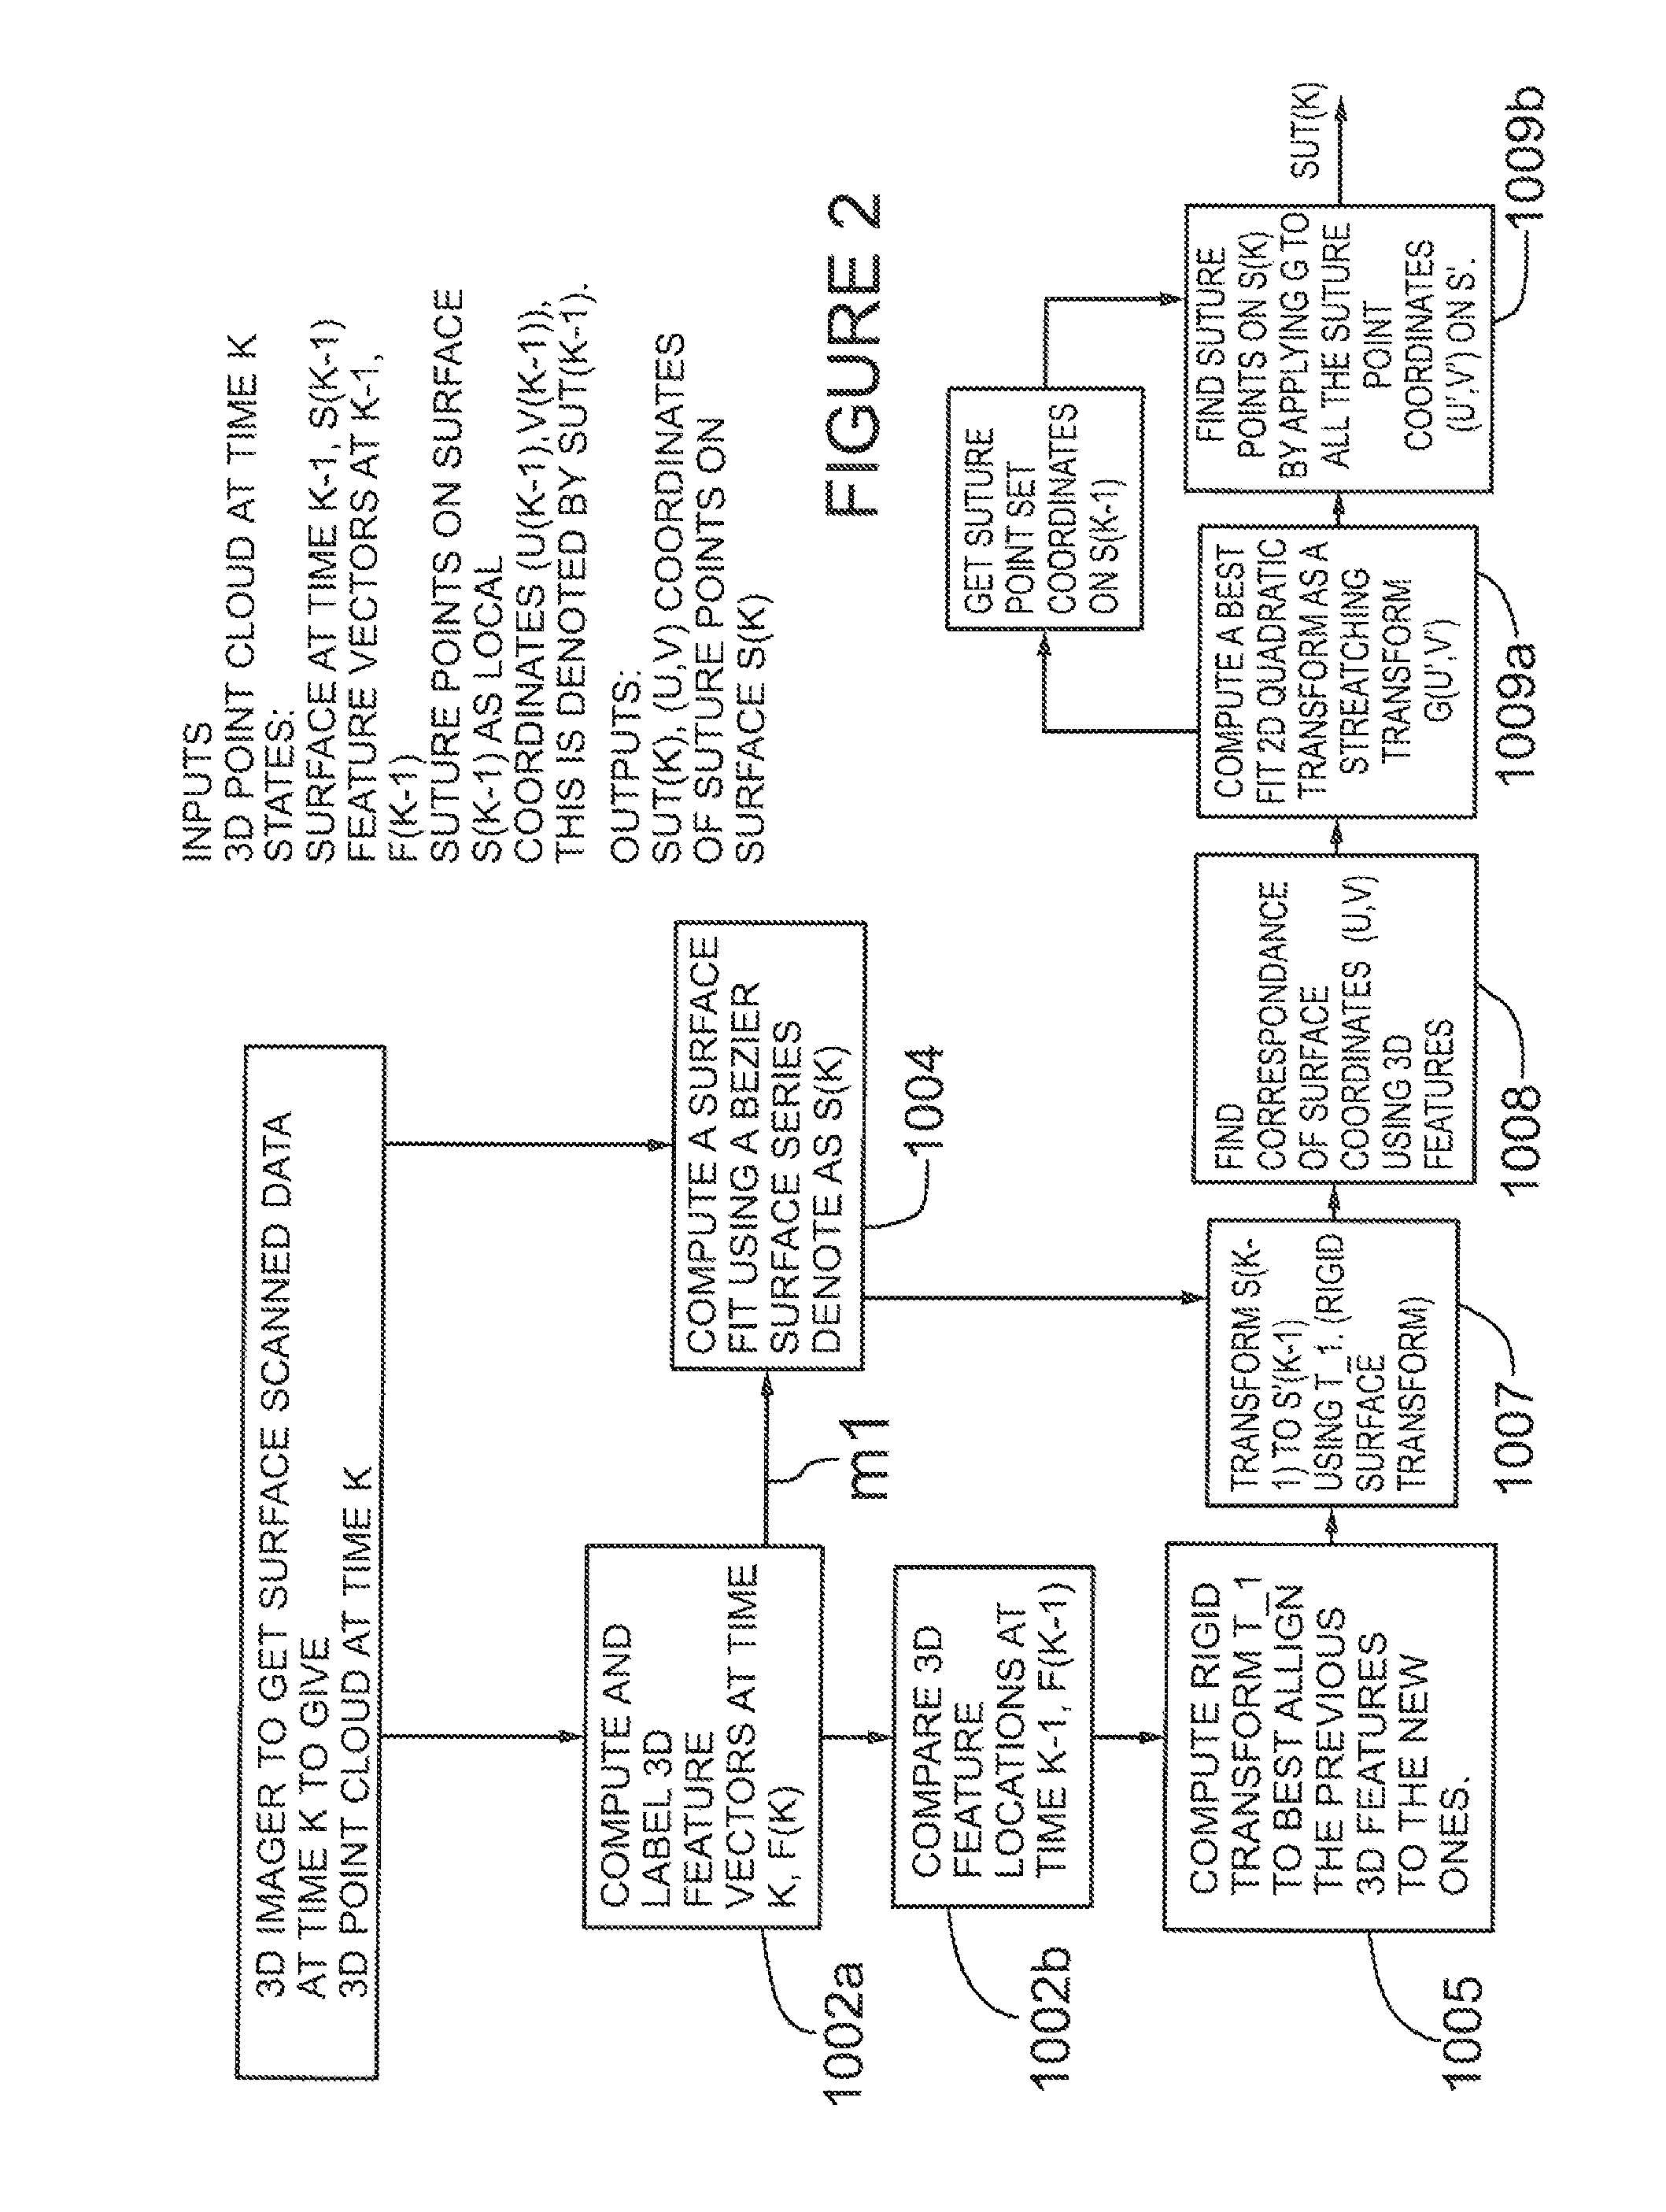 Method of real-time tracking of moving/flexible surfaces